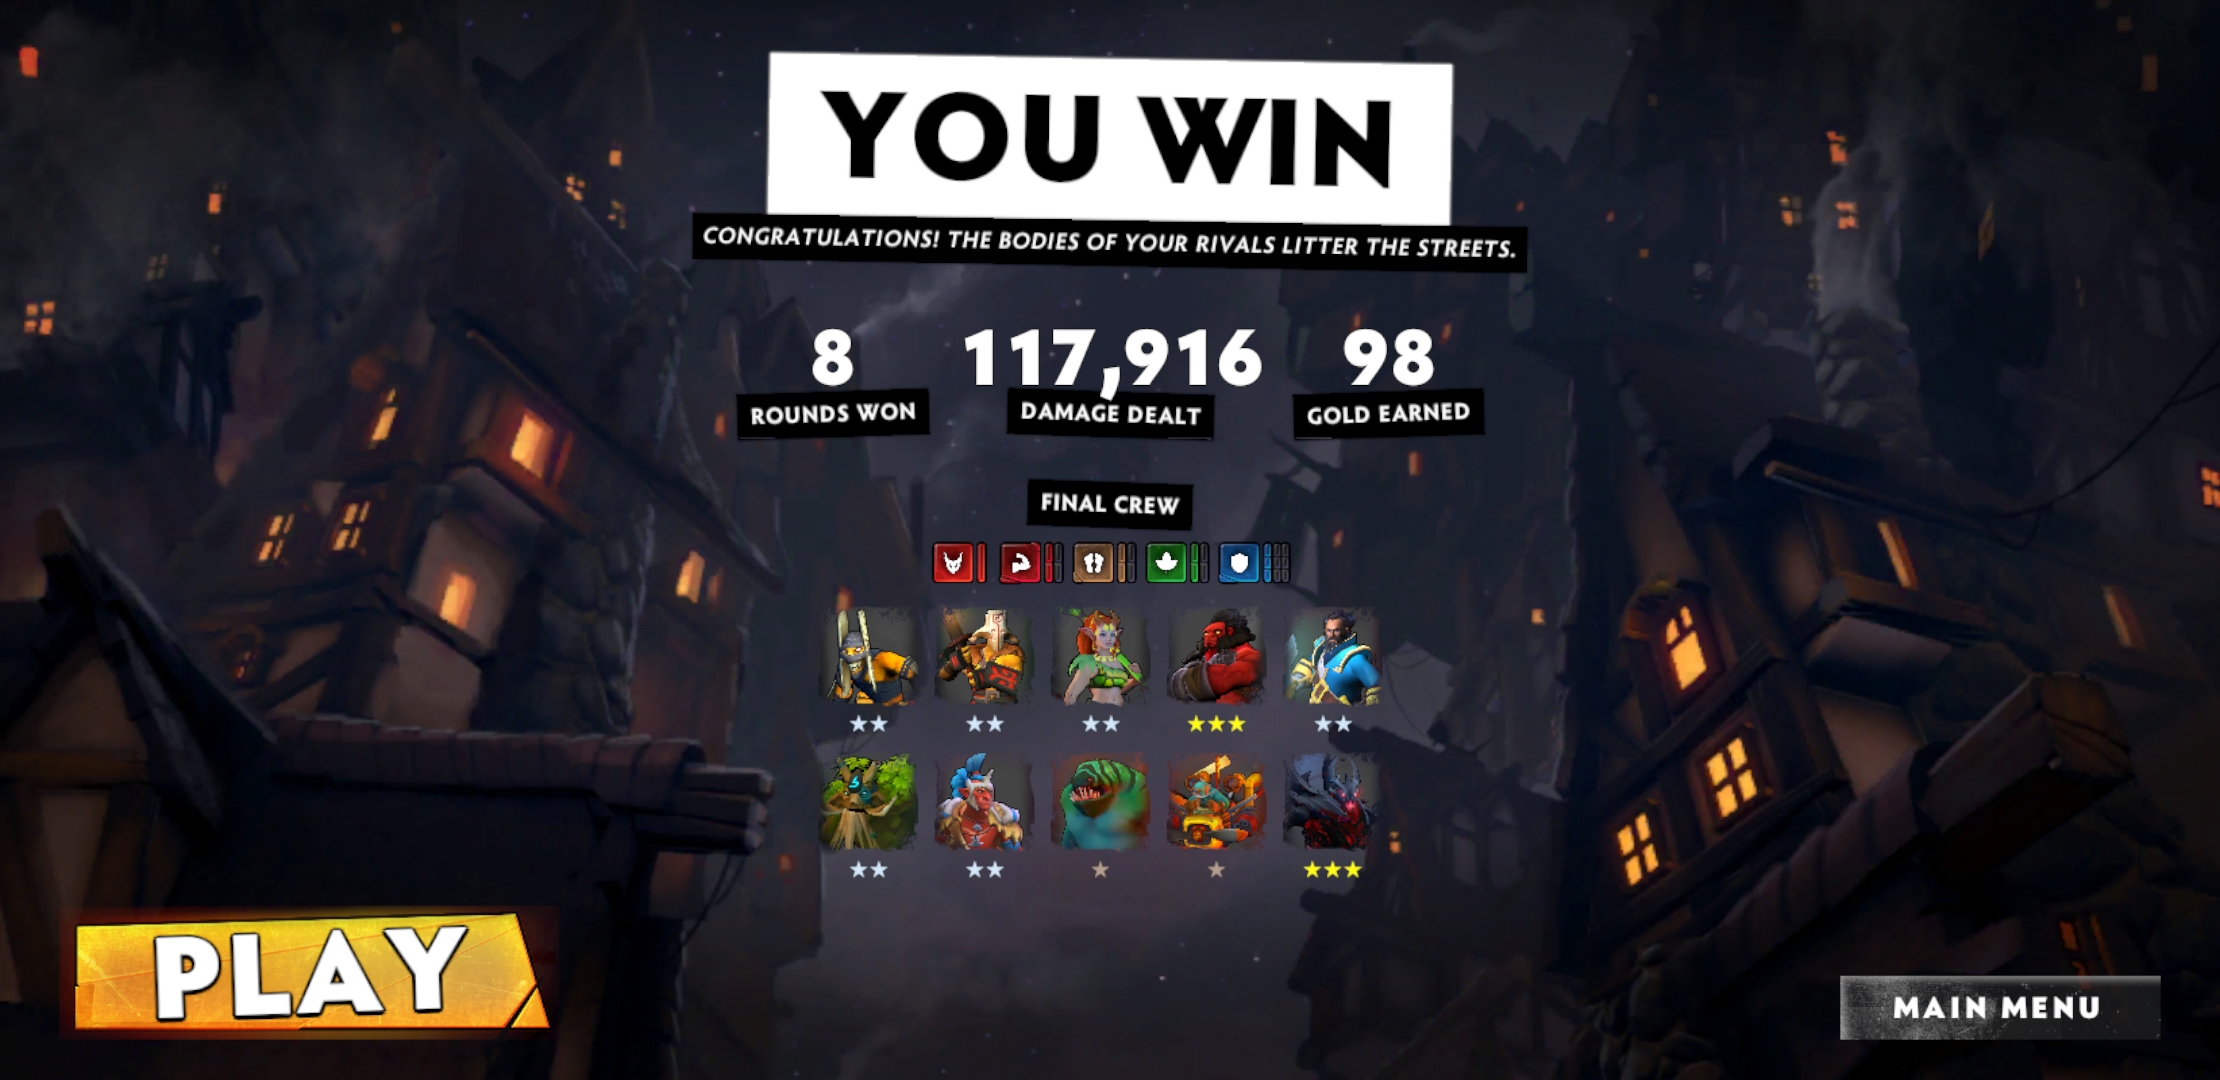 auto chess best builds 2020